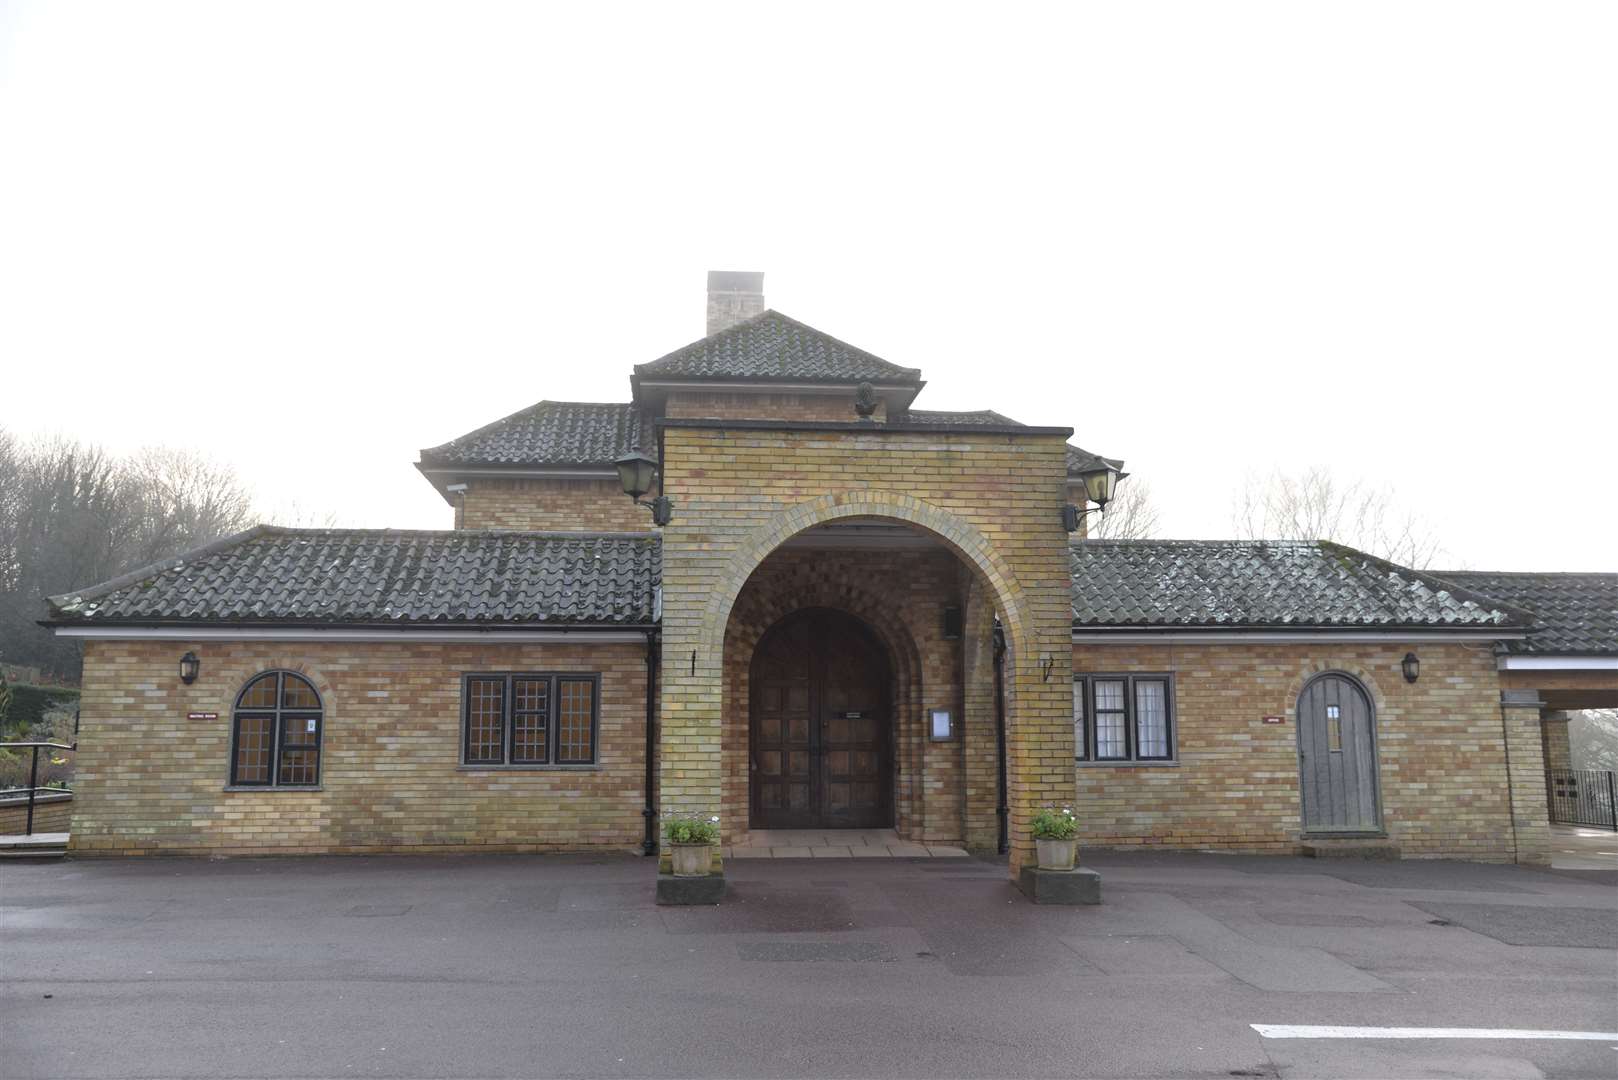 A cremation at the Barham Crematorium was unable to be broadcast this week due to the overwhelming demand